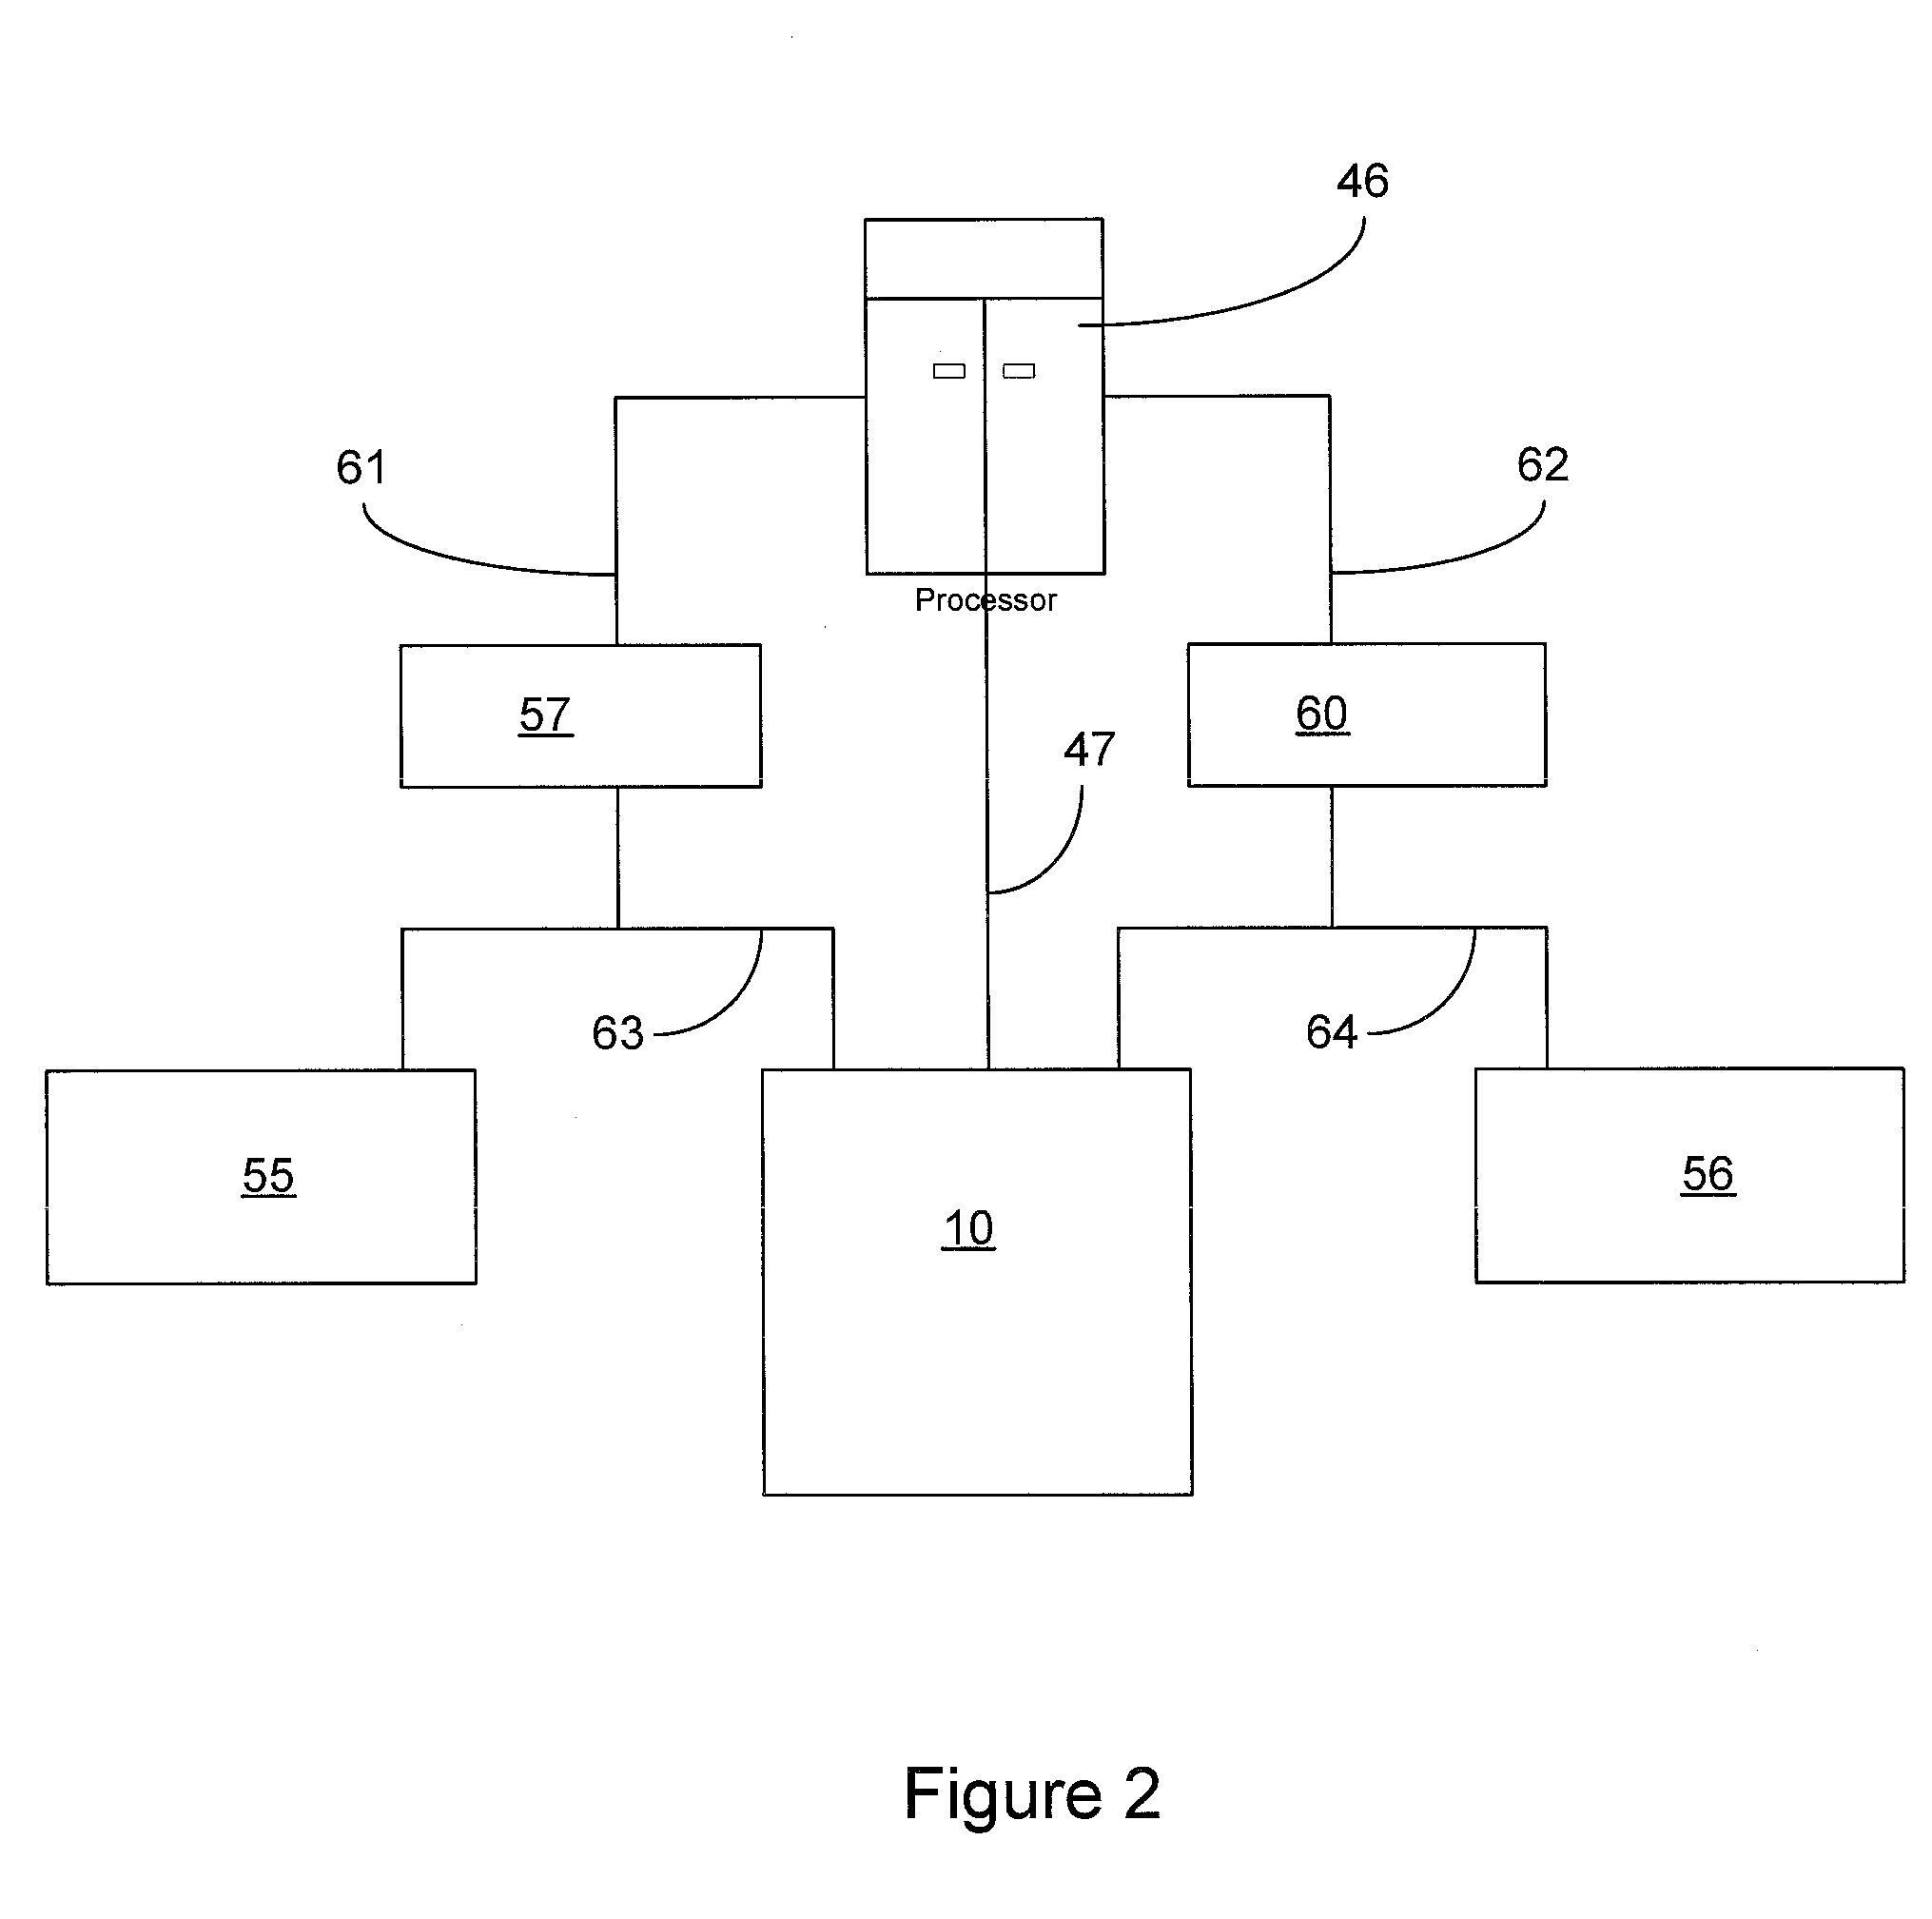 Method and Apparatus for Microwave Assisted High Throughput High Pressure Chemical Synthesis